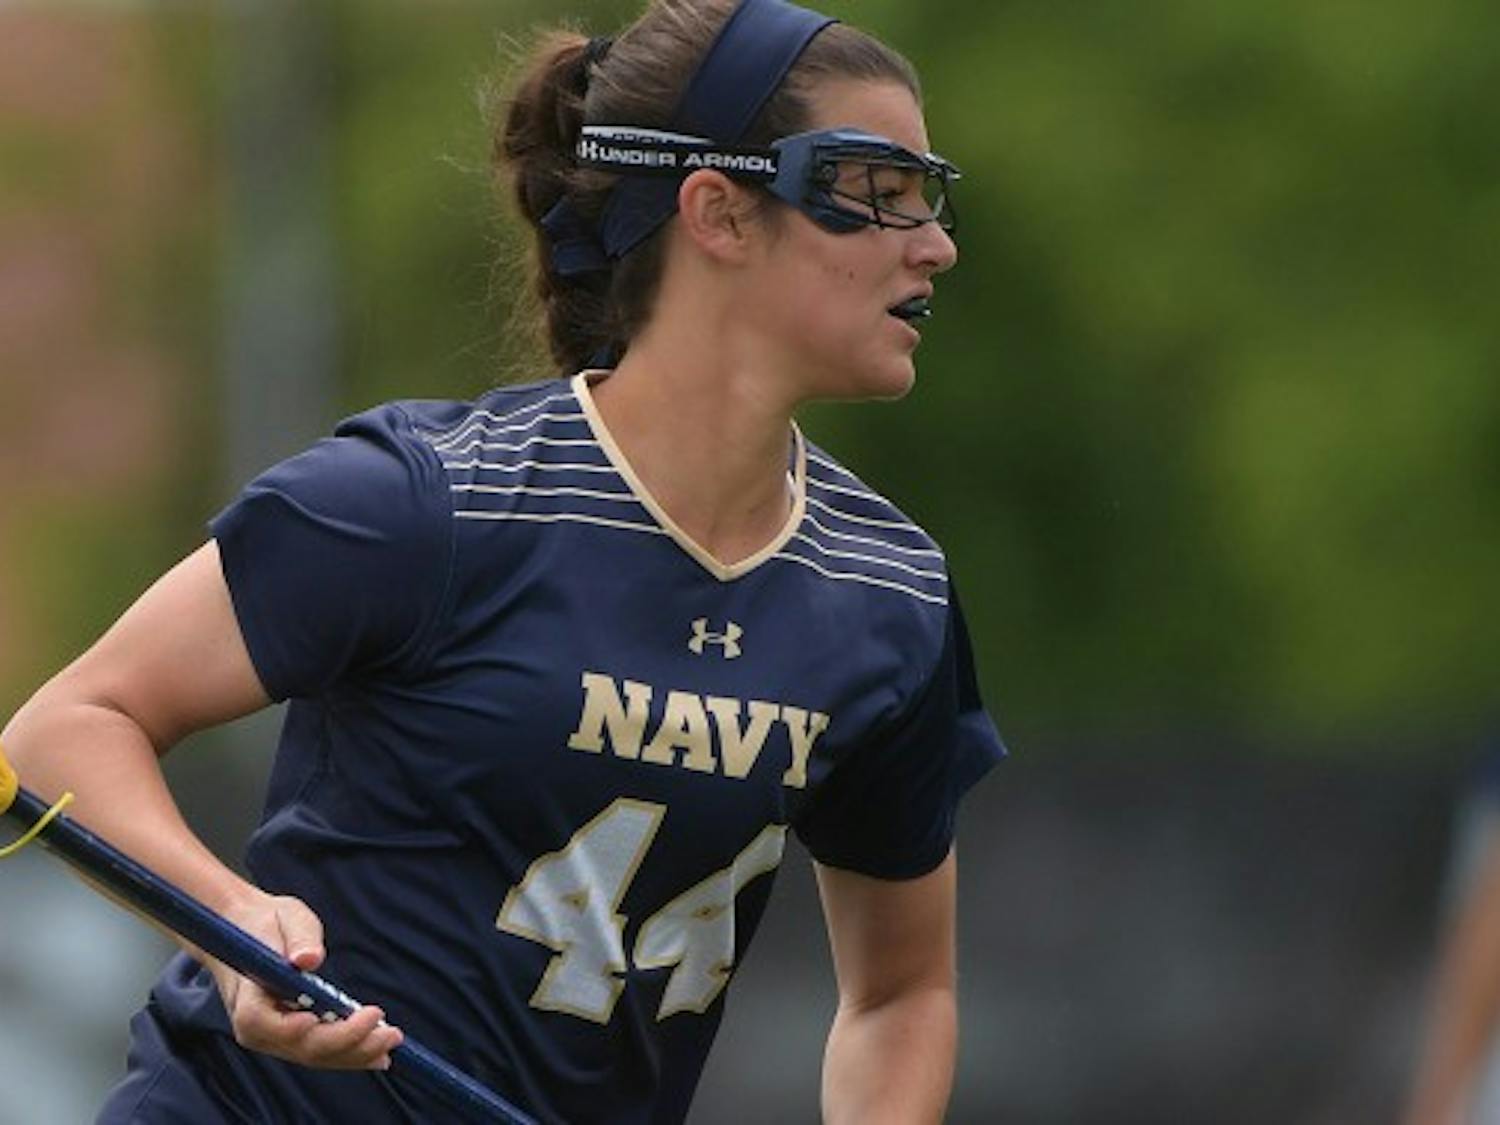 Navy's Julia Collins in action. Photo courtesy of Naval Academy Sports Information